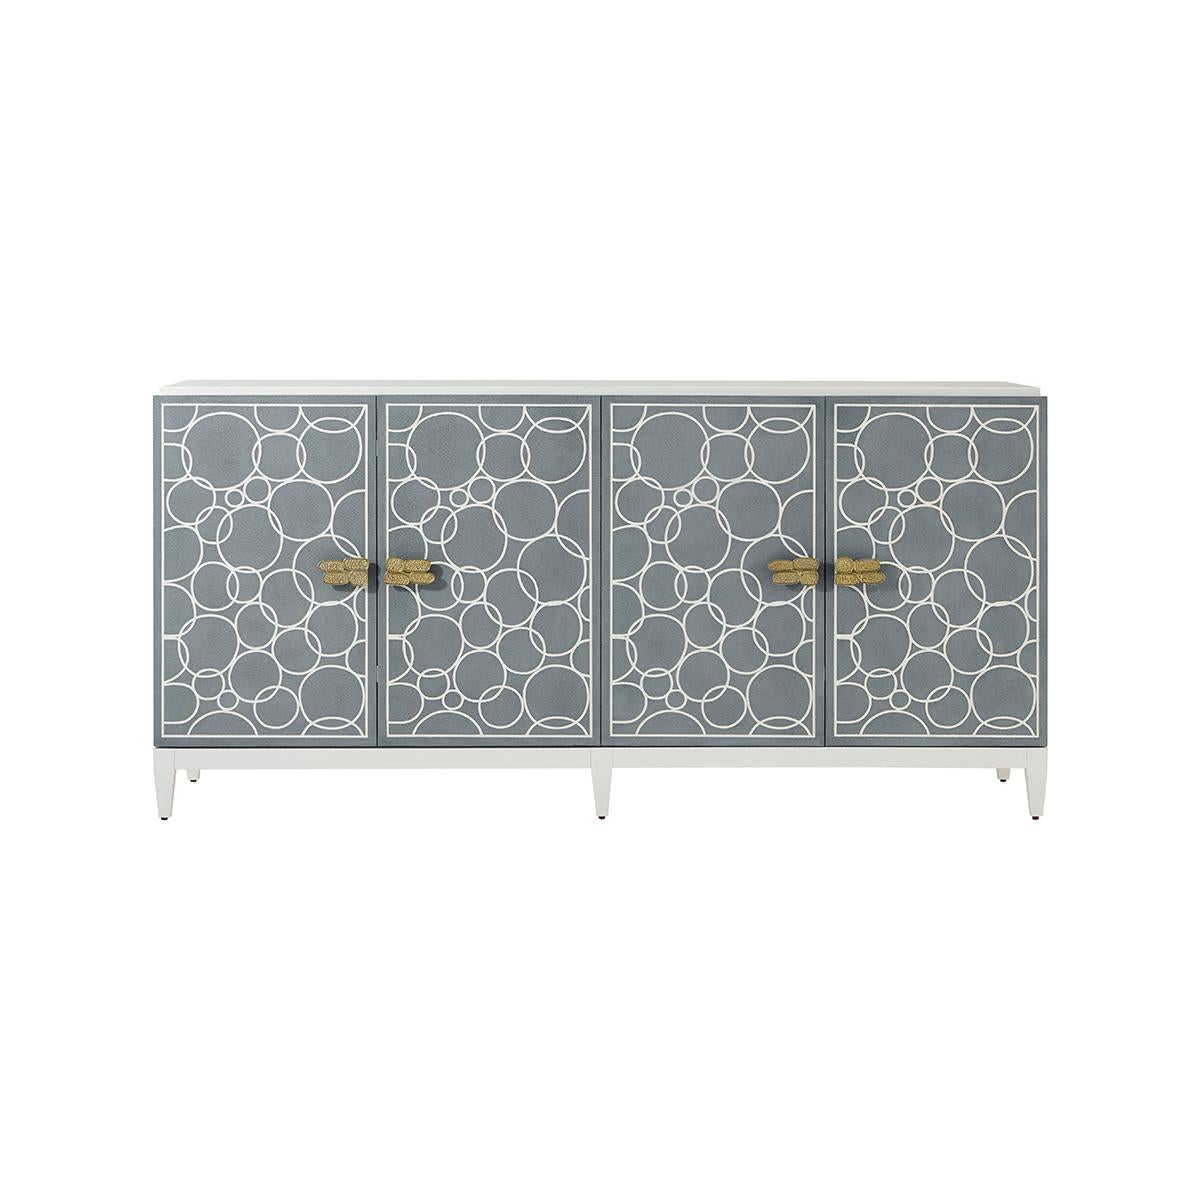 In our White Dove lacquer finish is designed to be a statement piece. With four faux shagreen embossed leather doors in our Sea Foam finish are paired with a polished hammered aluminum handle. Adjustable shelving is included on a short tapered